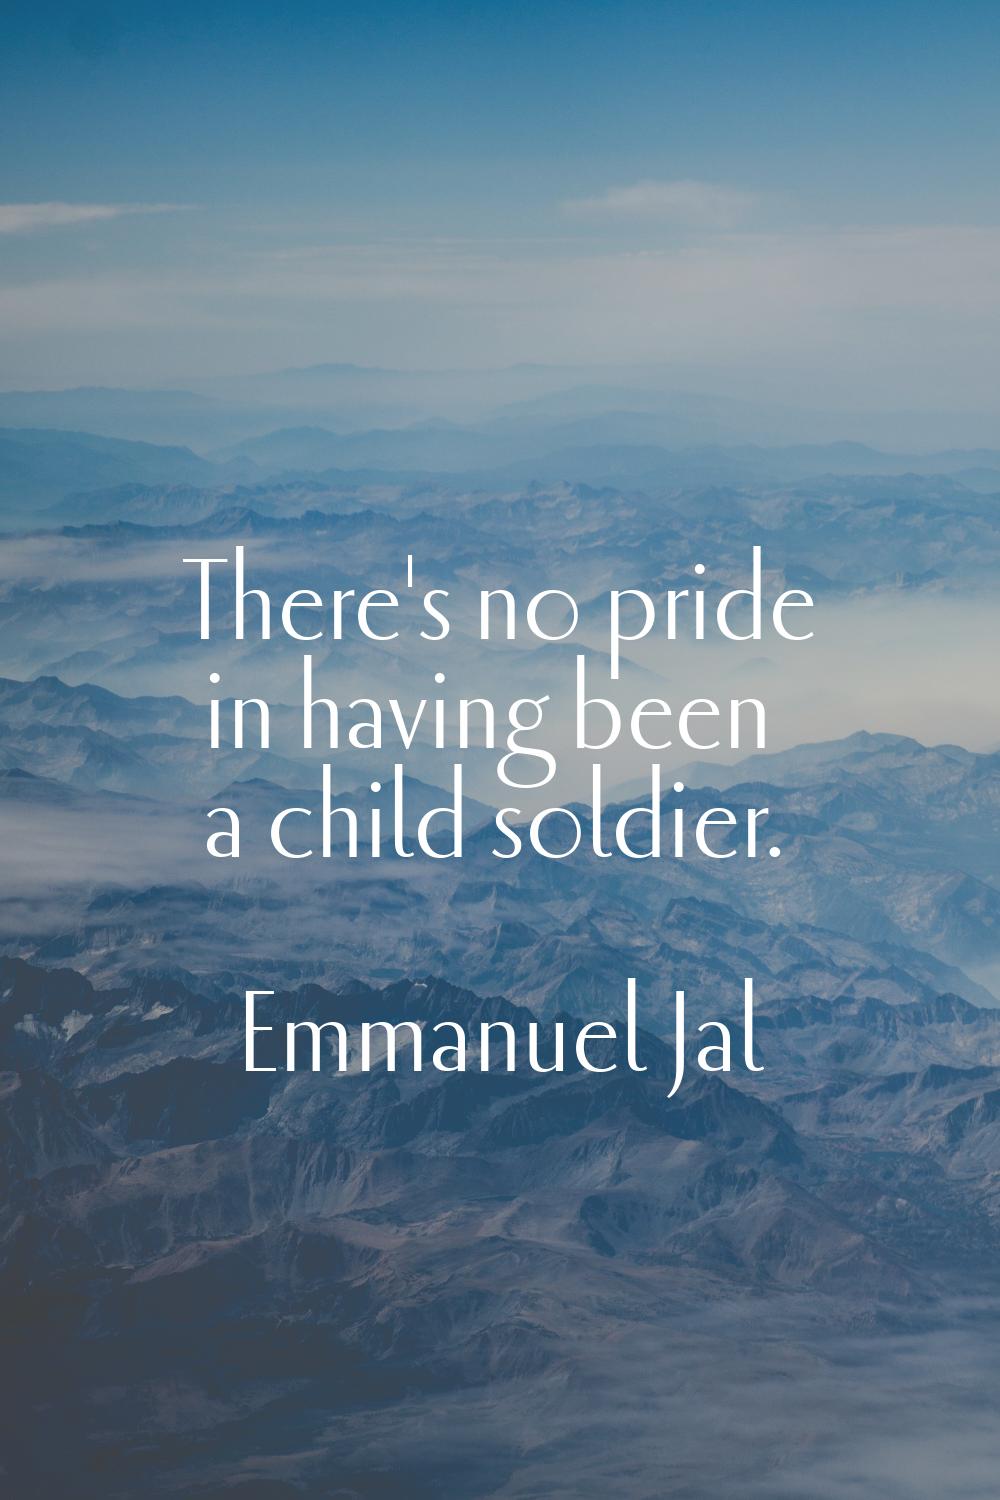 There's no pride in having been a child soldier.